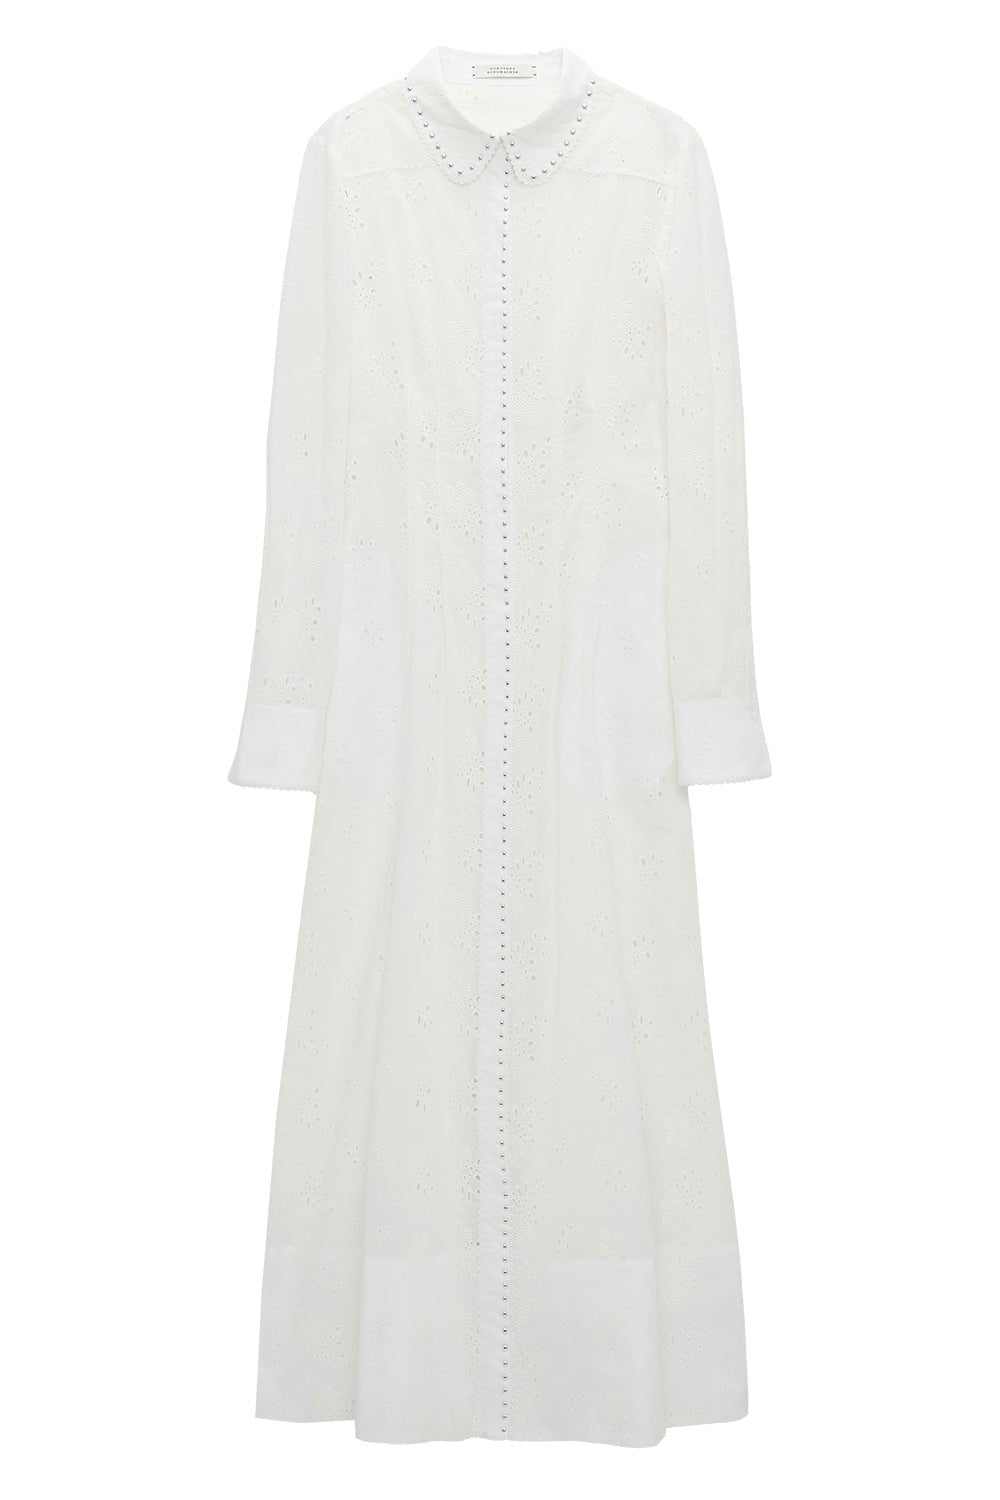 DOROTHEE SCHUMACHER-Embroidered Ease Dress-